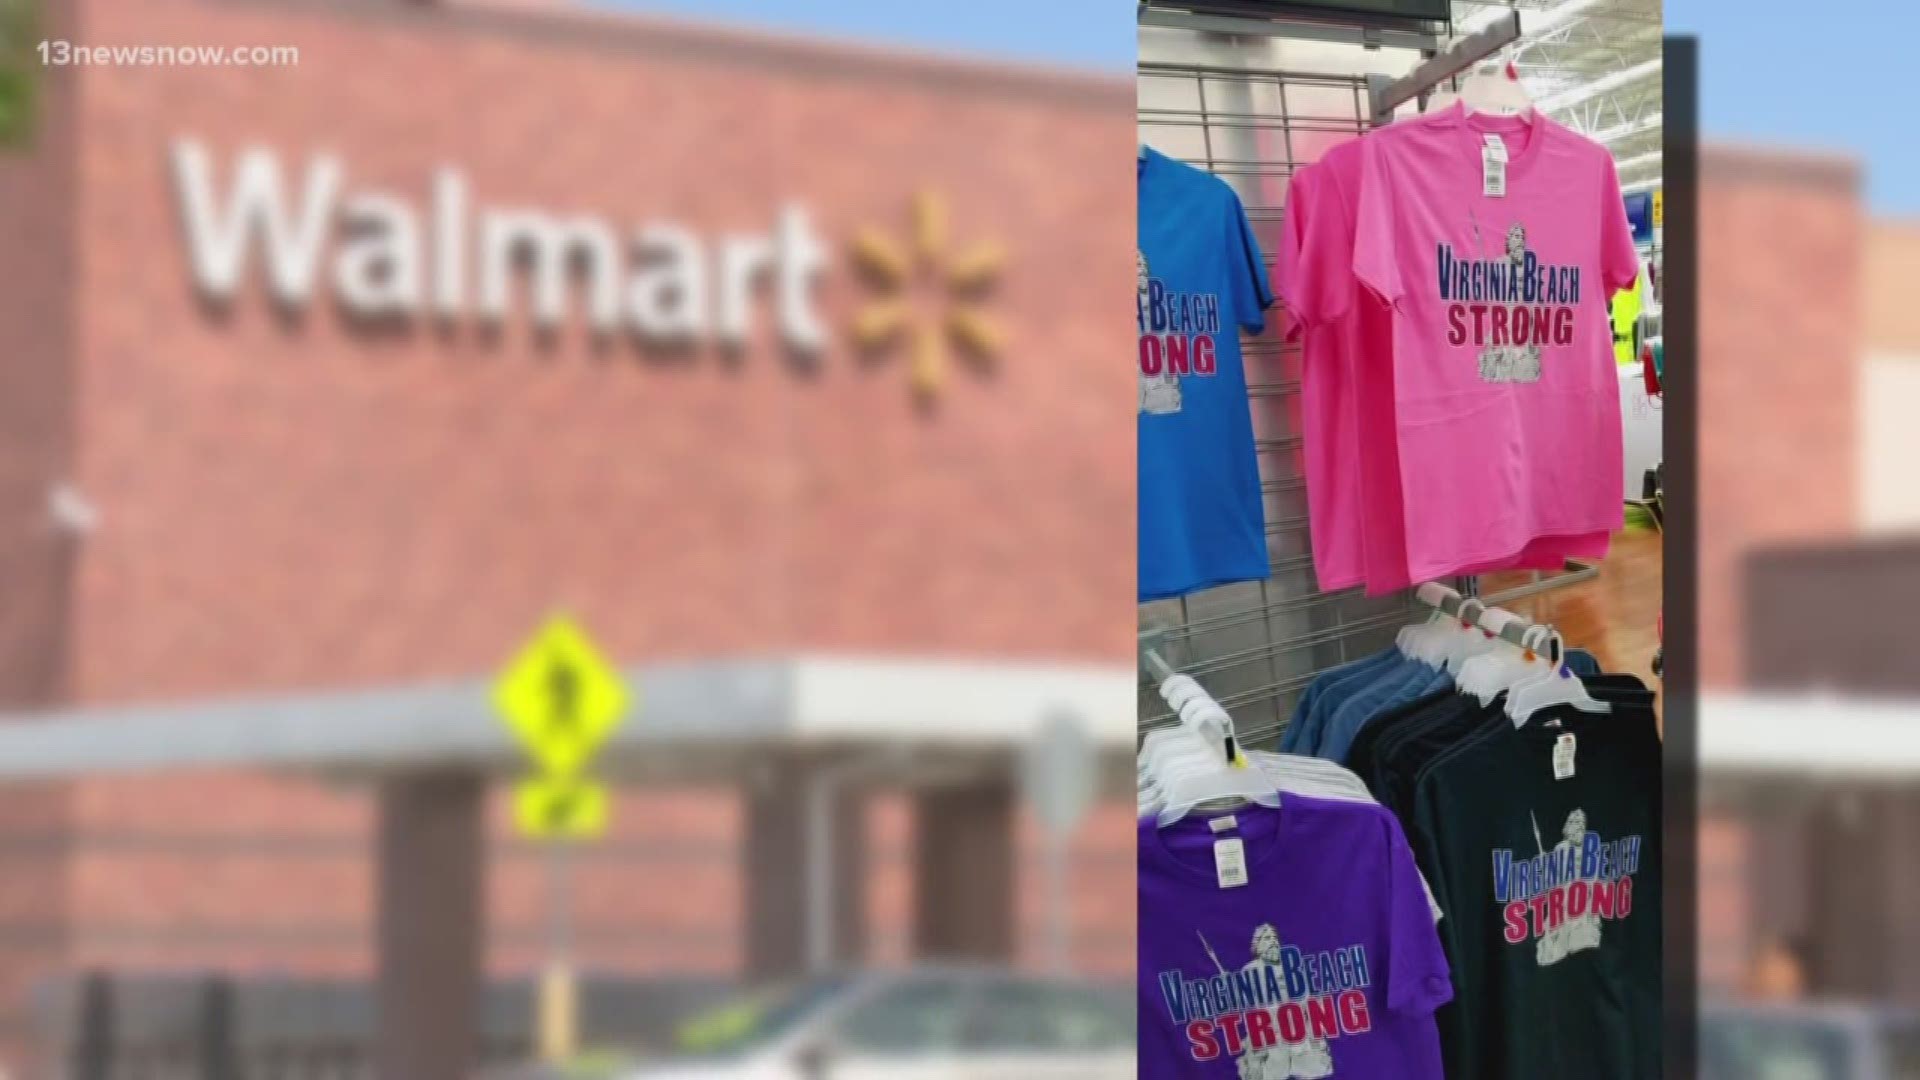 Shoppers were upset because they believe Walmart was trying to profit off the Virginia Beach Municipal Center shooting. Walmart has not responded.